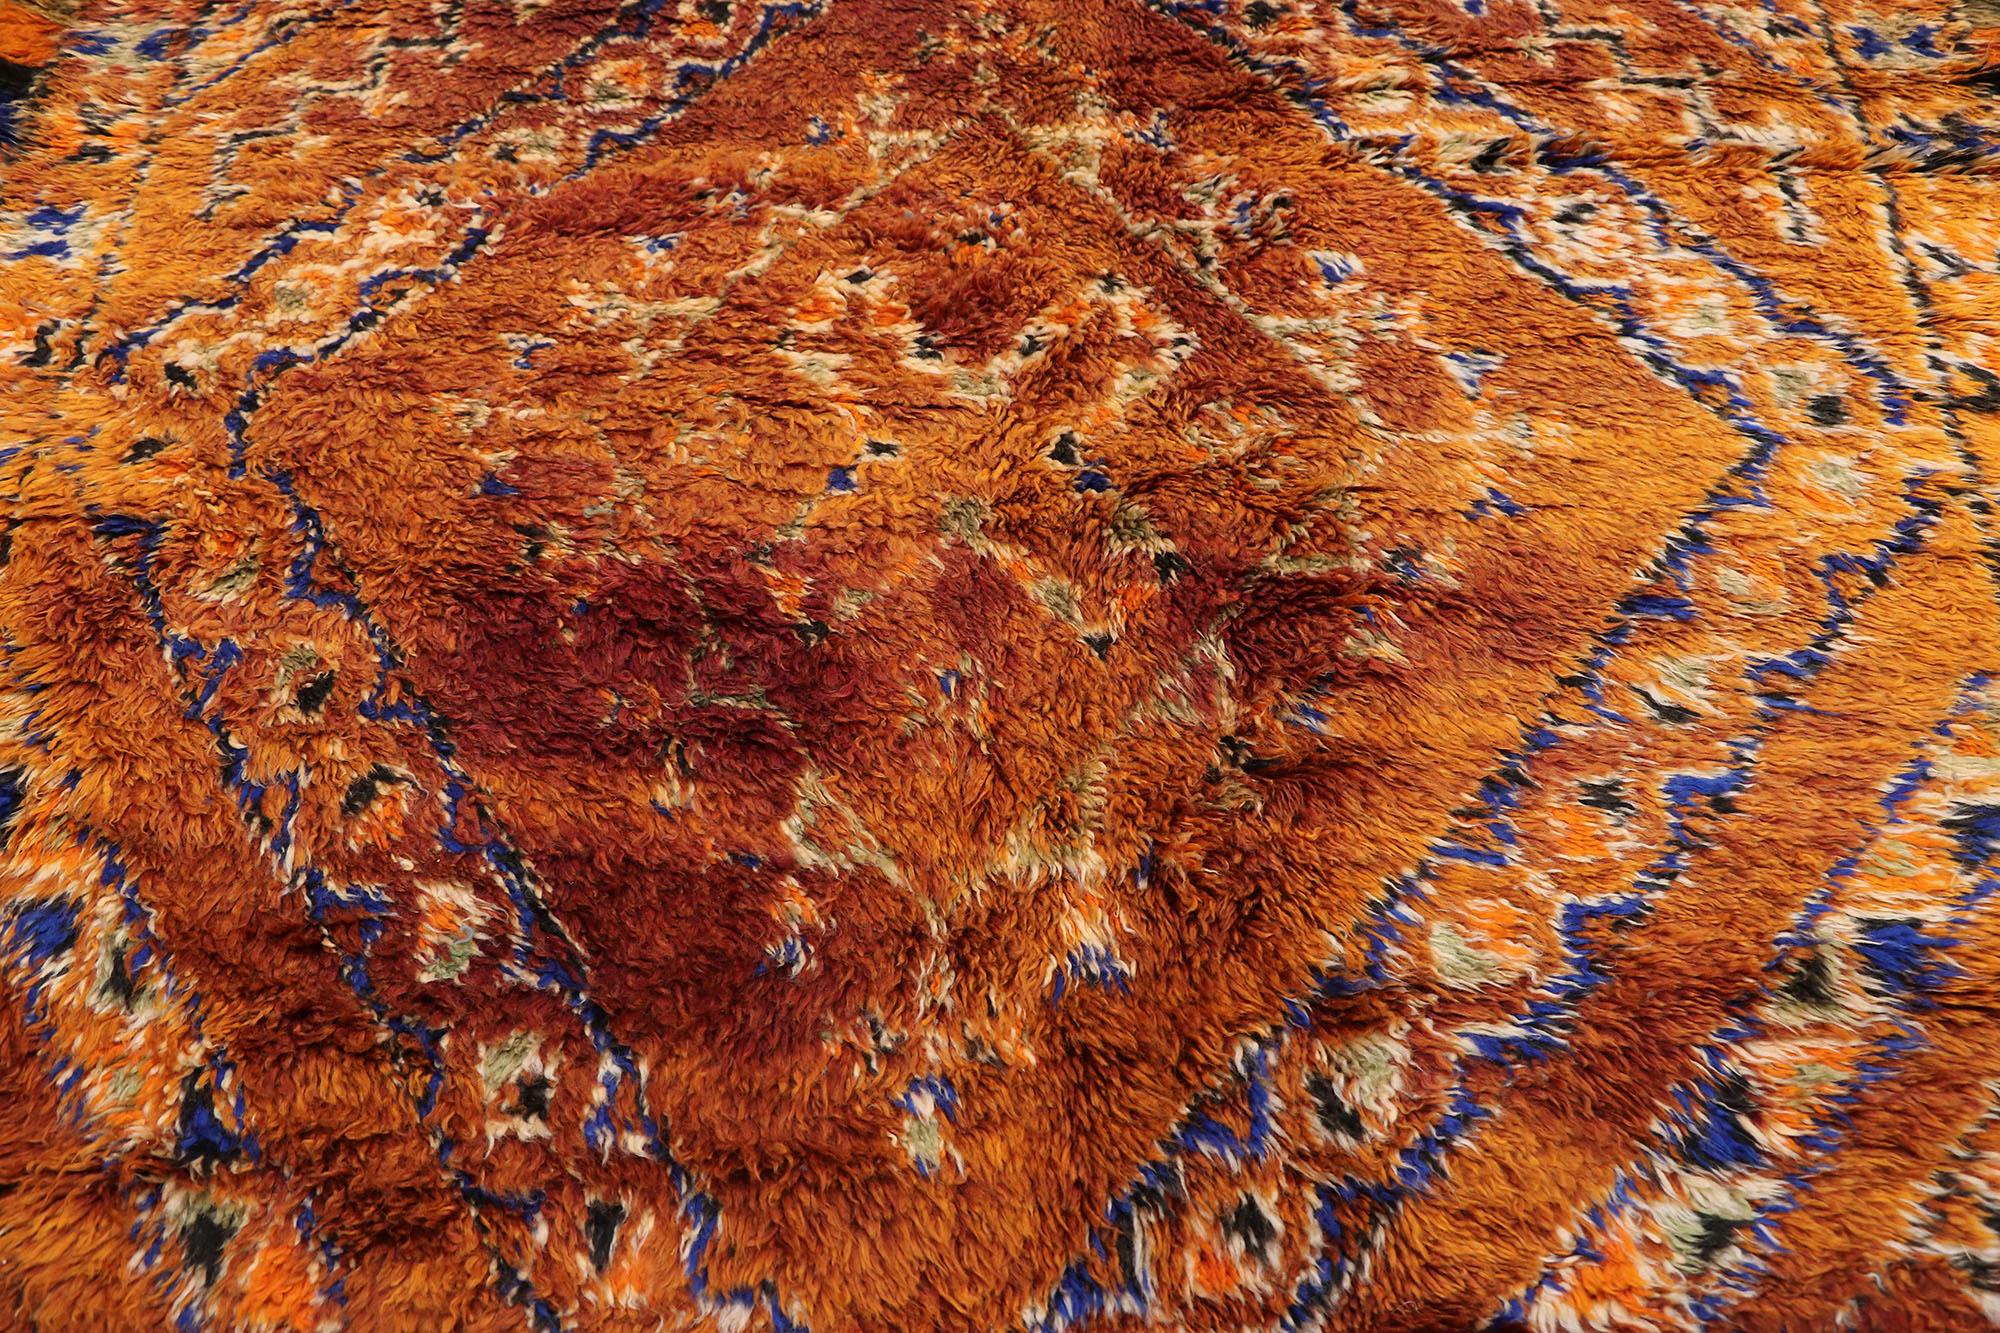 Hand-Knotted Vintage Berber Beni M'Guild Moroccan Rug with Mid-Century Modern Style For Sale